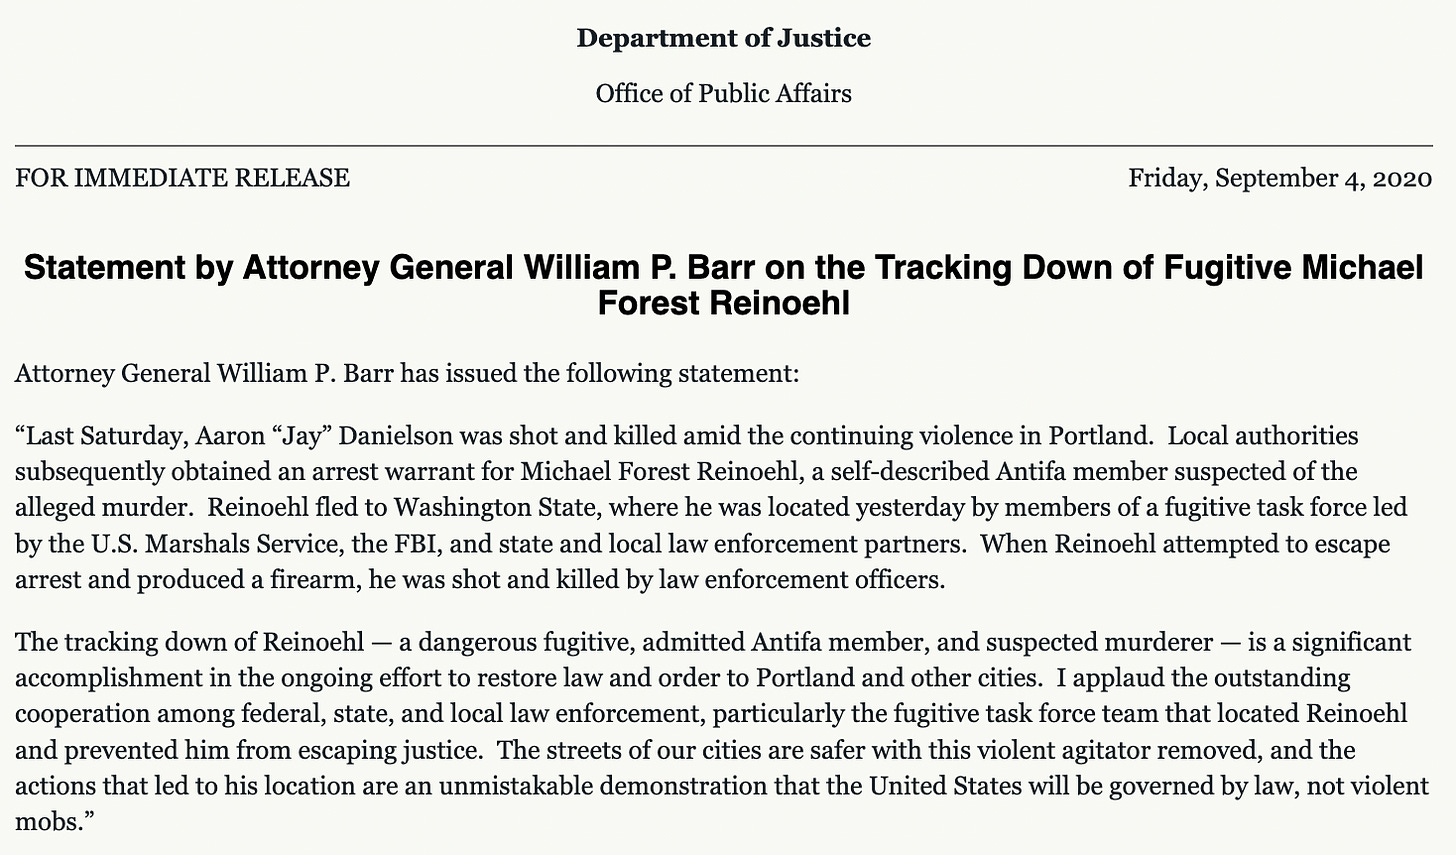 Attorney General William P. Barr has issued the following statement:  “Last Saturday, Aaron “Jay” Danielson was shot and killed amid the continuing violence in Portland.  Local authorities subsequently obtained an arrest warrant for Michael Forest Reinoehl, a self-described Antifa member suspected of the alleged murder.  Reinoehl fled to Washington State, where he was located yesterday by members of a fugitive task force led by the U.S. Marshals Service, the FBI, and state and local law enforcement partners.  When Reinoehl attempted to escape arrest and produced a firearm, he was shot and killed by law enforcement officers.    The tracking down of Reinoehl — a dangerous fugitive, admitted Antifa member, and suspected murderer — is a significant accomplishment in the ongoing effort to restore law and order to Portland and other cities.  I applaud the outstanding cooperation among federal, state, and local law enforcement, particularly the fugitive task force team that located Reinoehl and prevented him from escaping justice.  The streets of our cities are safer with this violent agitator removed, and the actions that led to his location are an unmistakable demonstration that the United States will be governed by law, not violent mobs.”